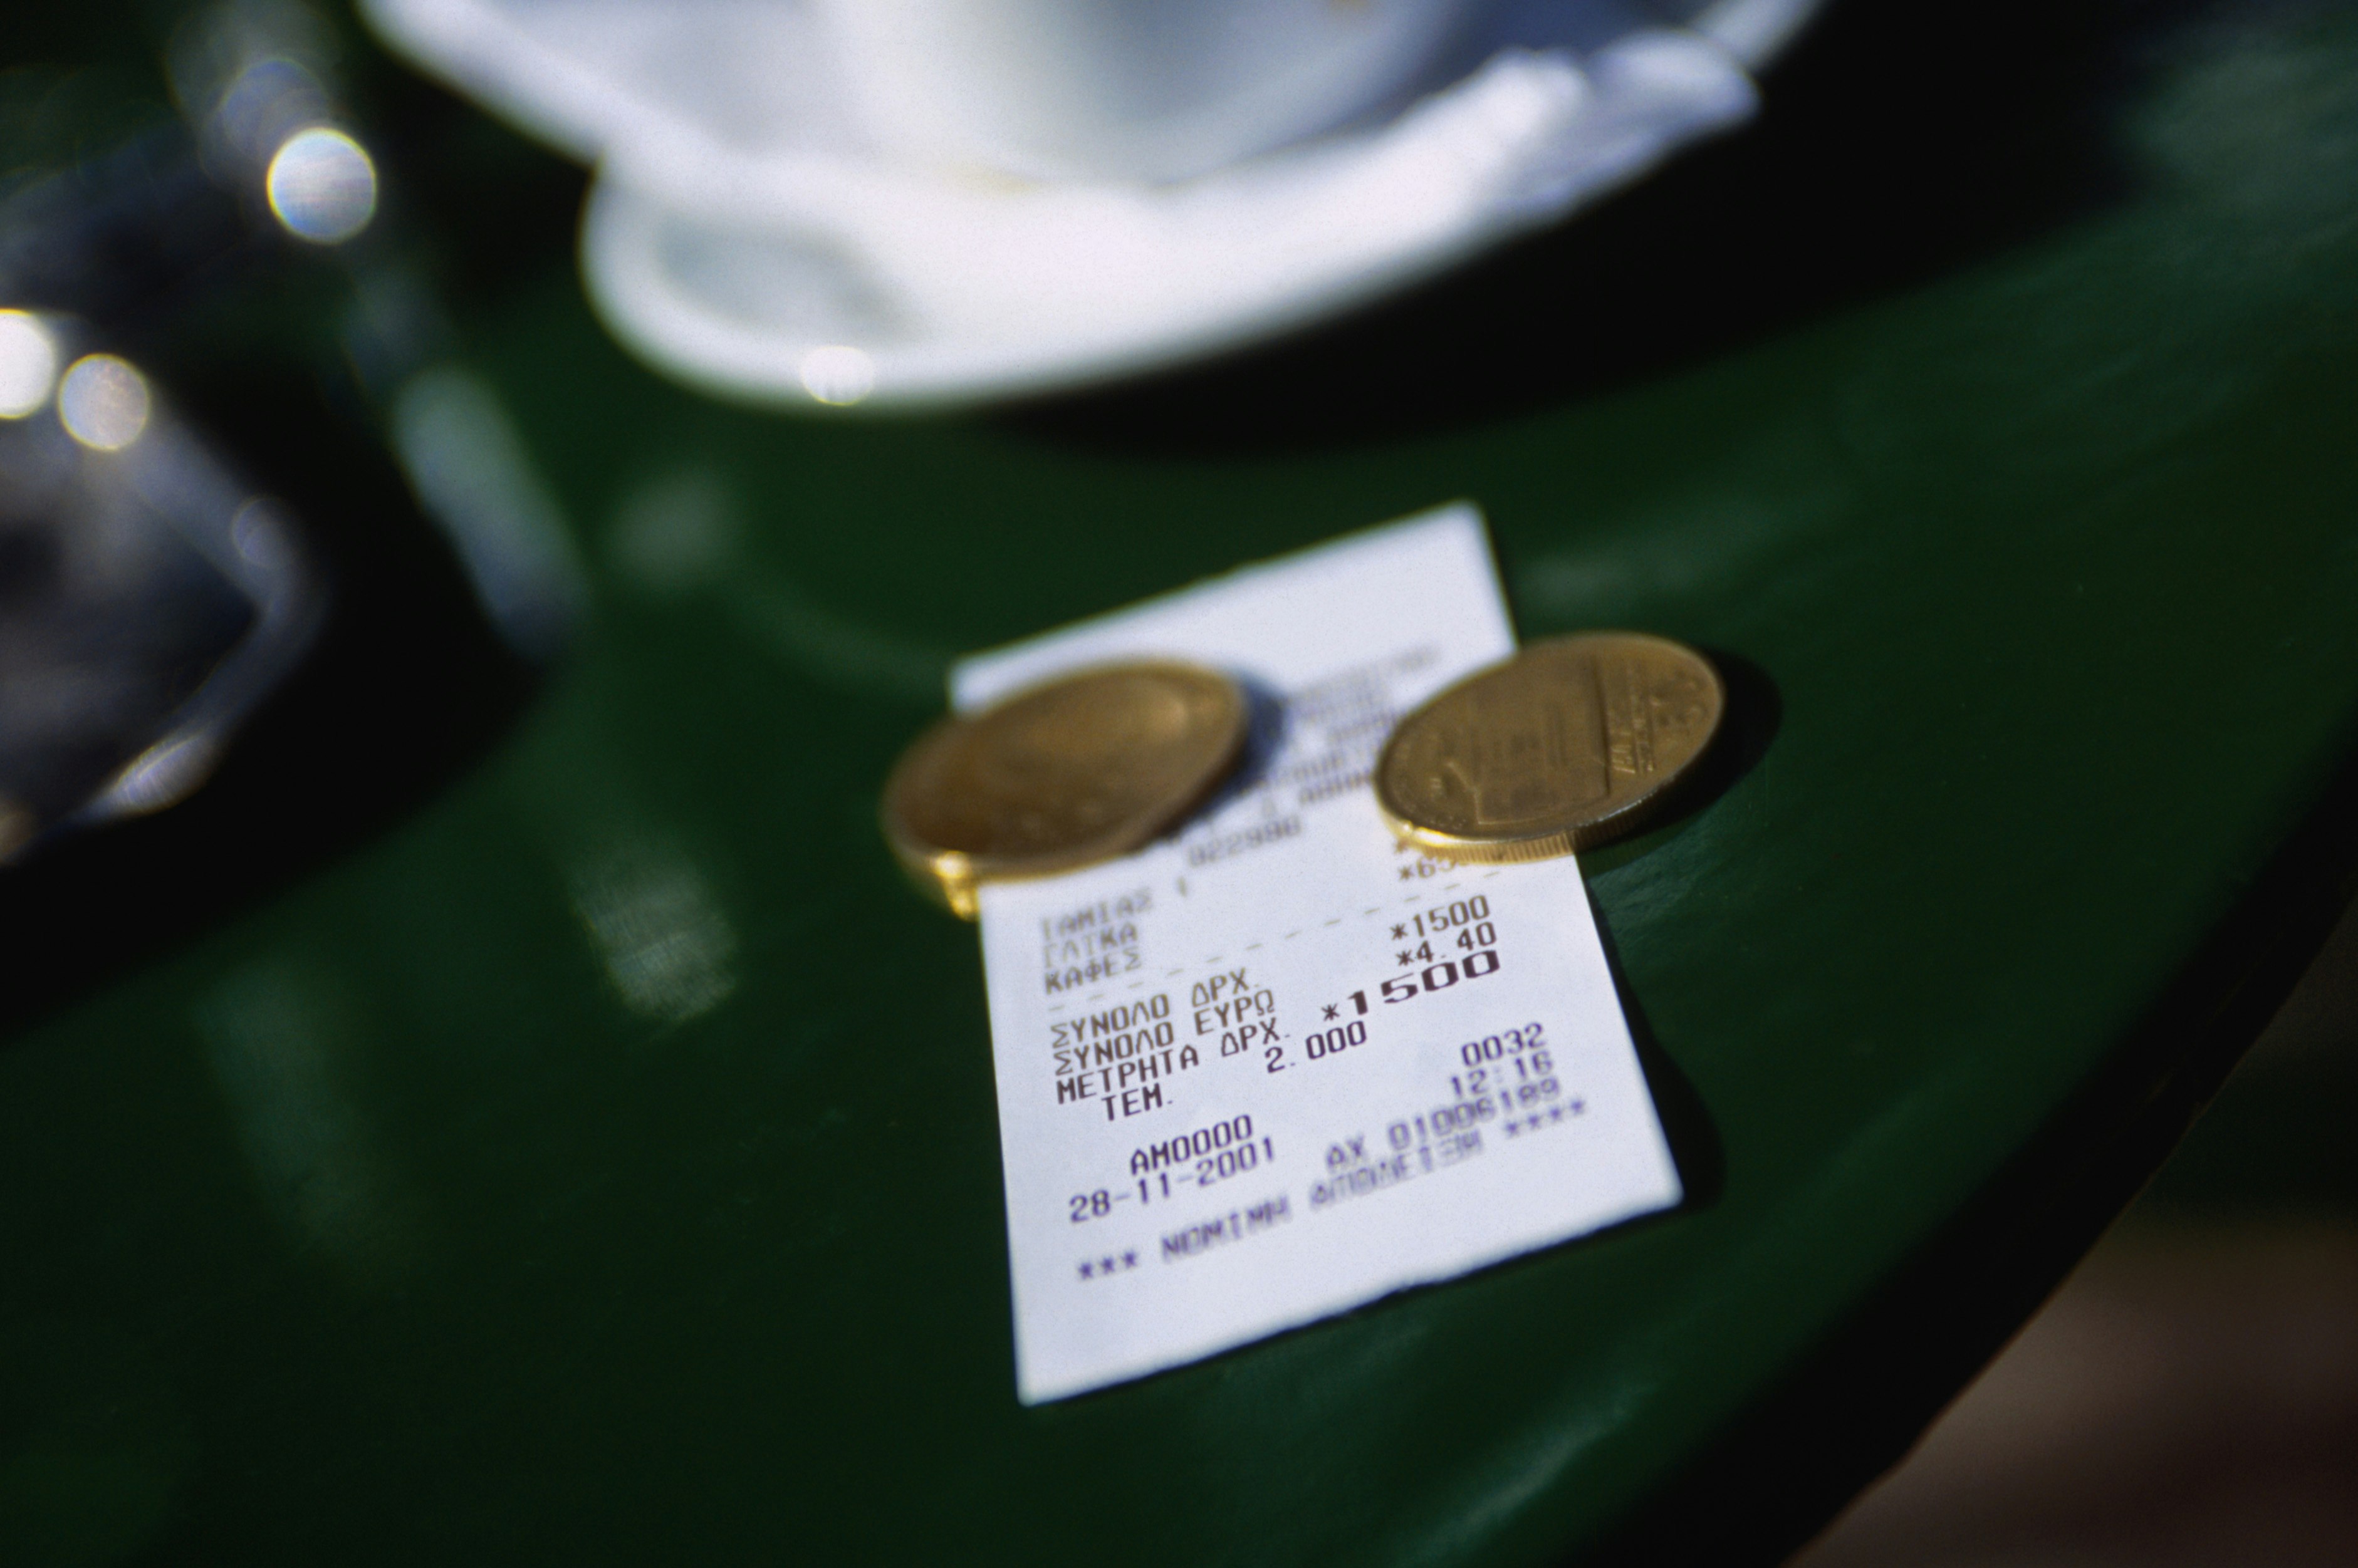 A bill and some coins on a small outside tables